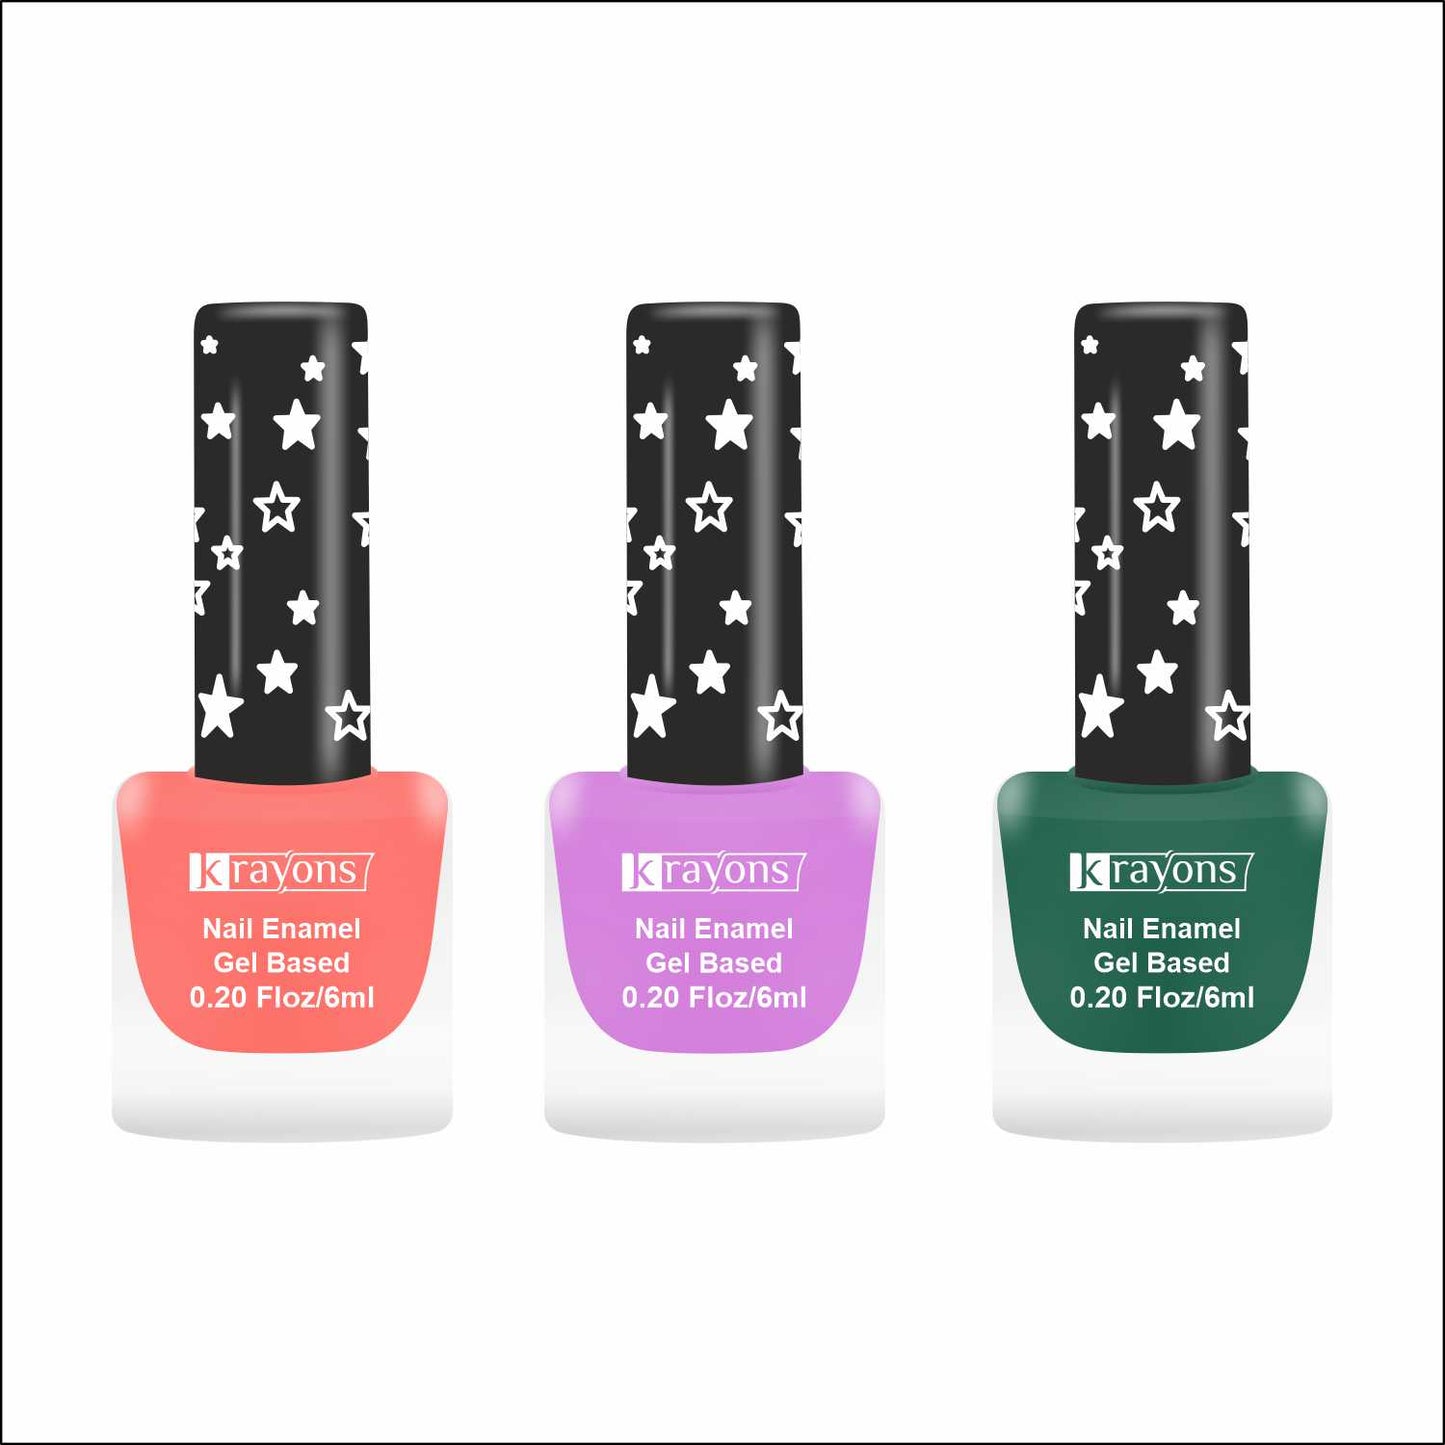 Krayons Cute Super Matte Finish Nail Enamel, Quick Dry, LongLasting, Blossom Peach, Plum Matte, Forest Green, 6ml Each (Pack of 3)